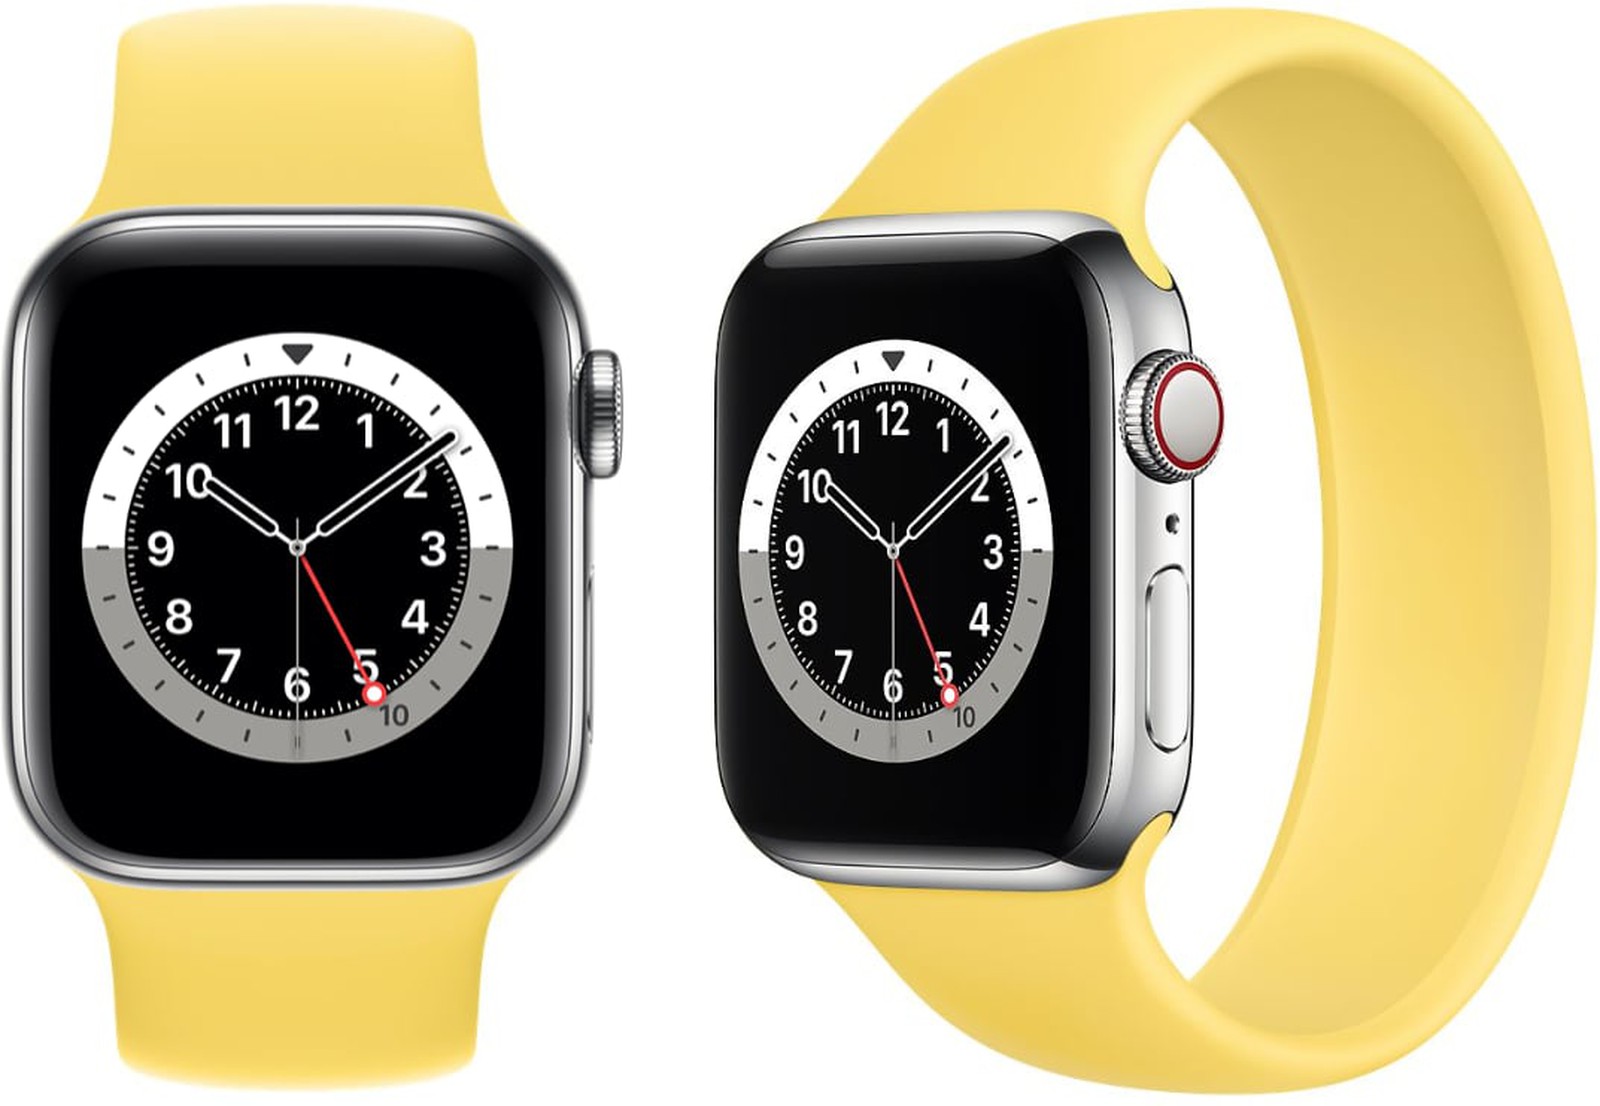 Apple Watch Series 6: Time to Buy? Reviews, Features and More